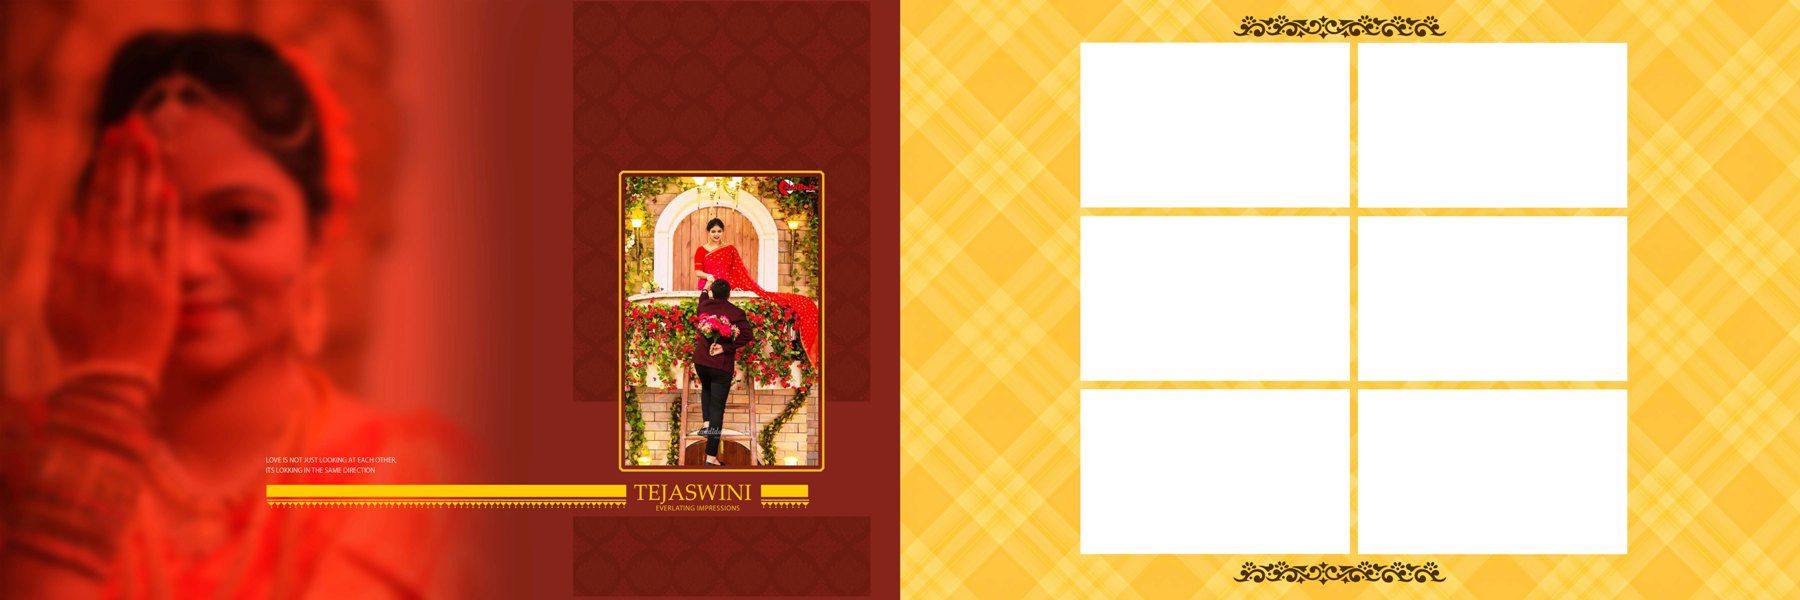 south indian wedding template